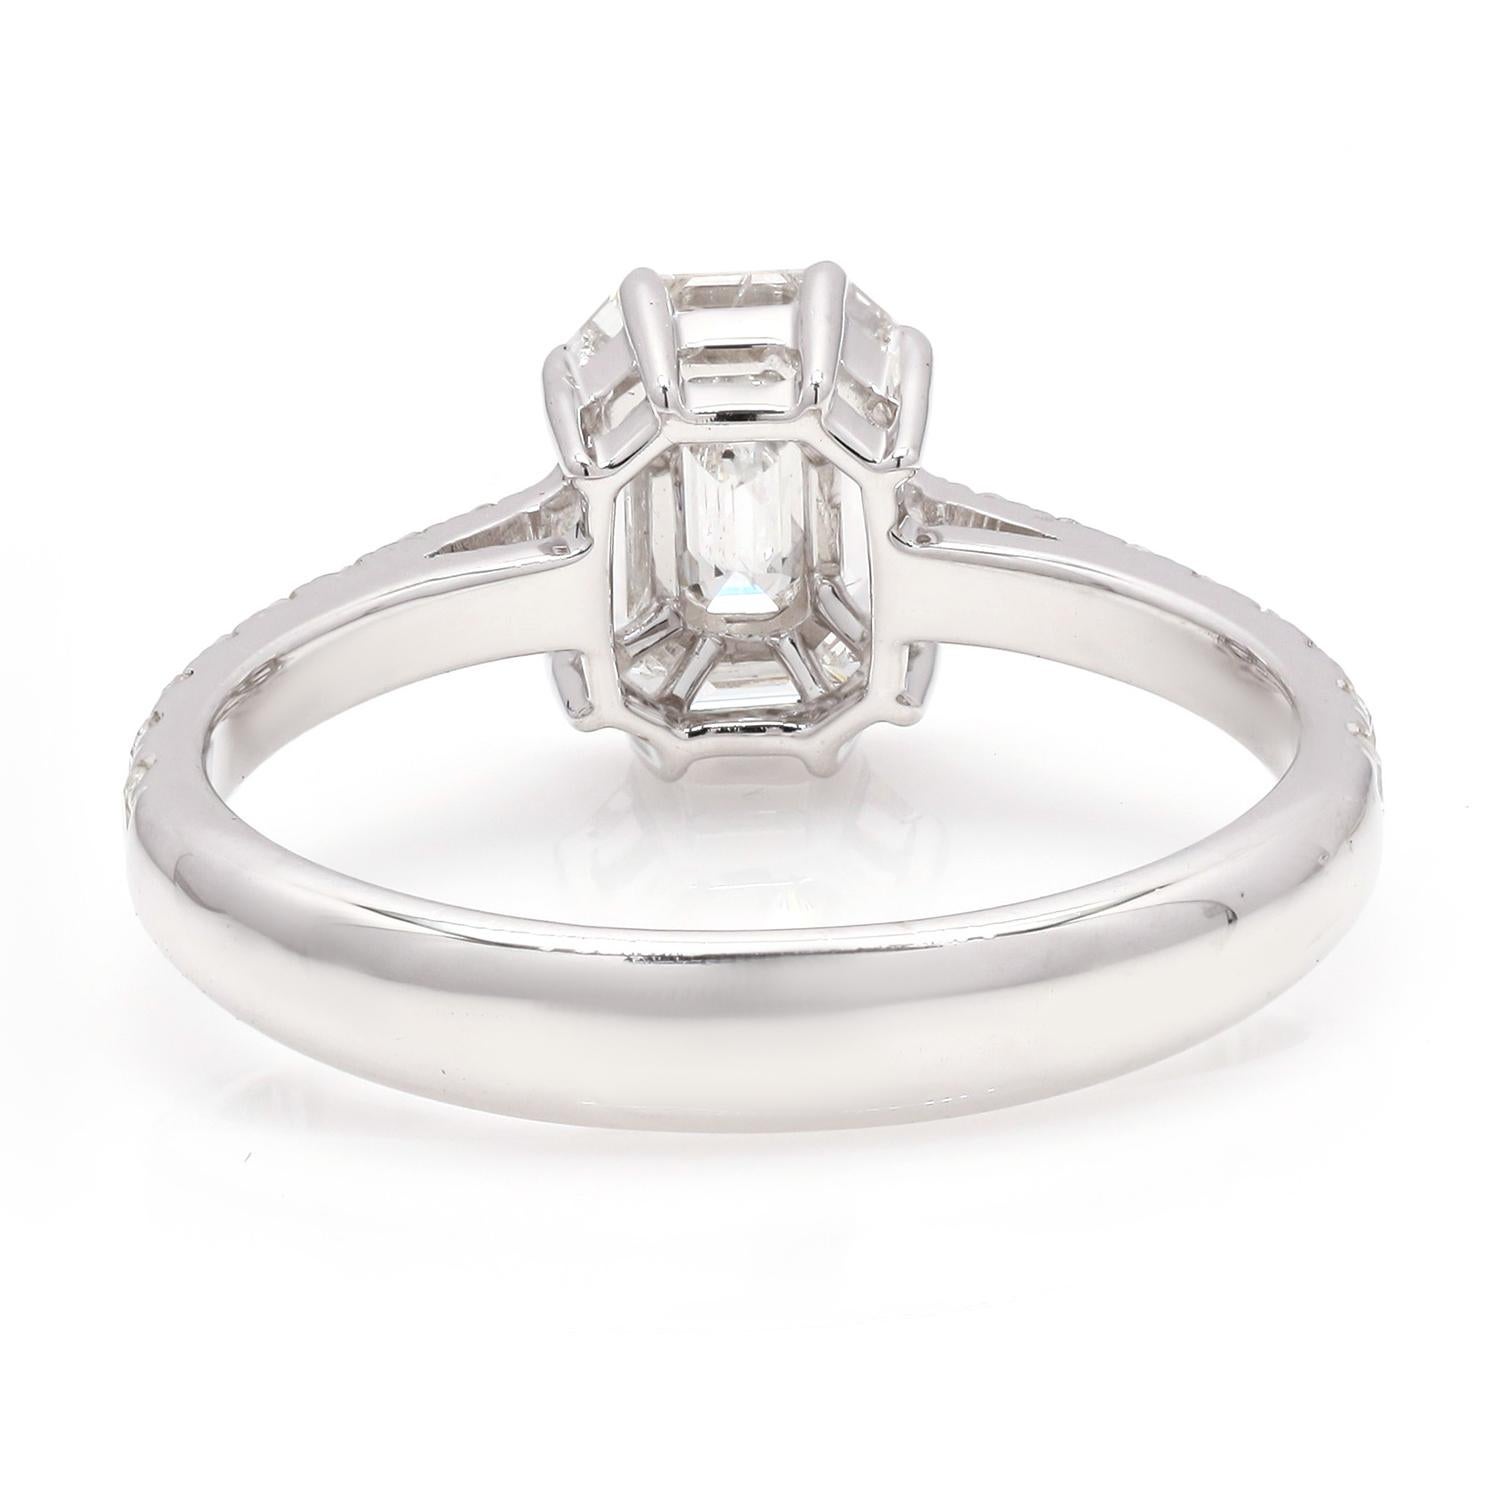 Contemporary Illusion Octogen Diamond Setting with Simple Diamond  Shank In 18k White Gold For Sale